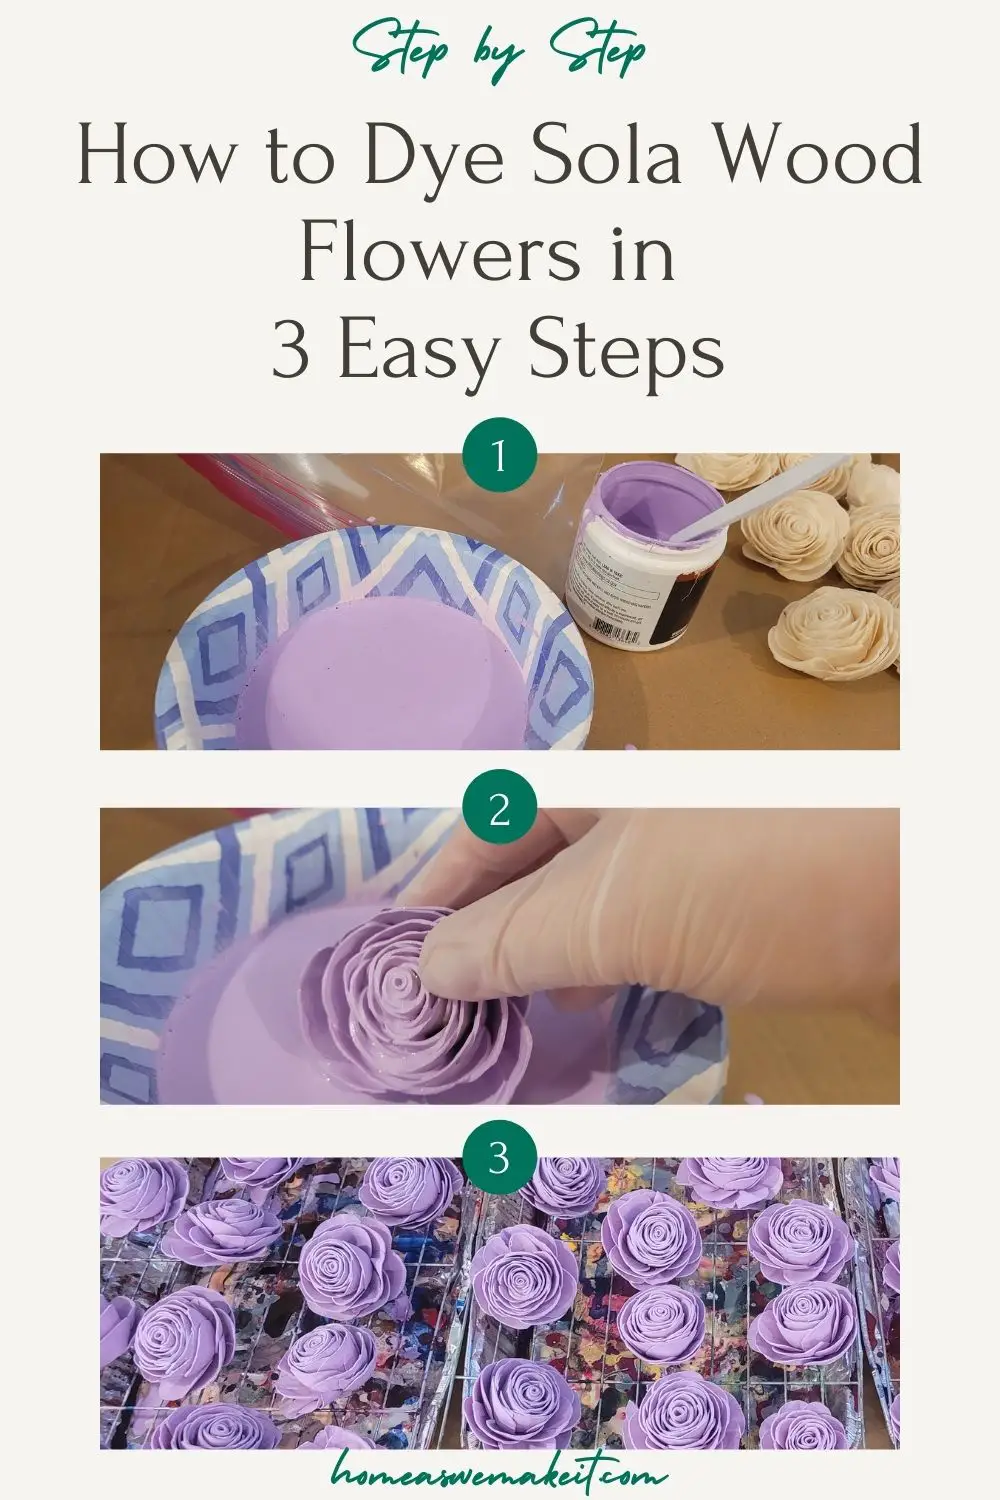 How to Easily Dye Sola Wood Flowers in 3 Steps